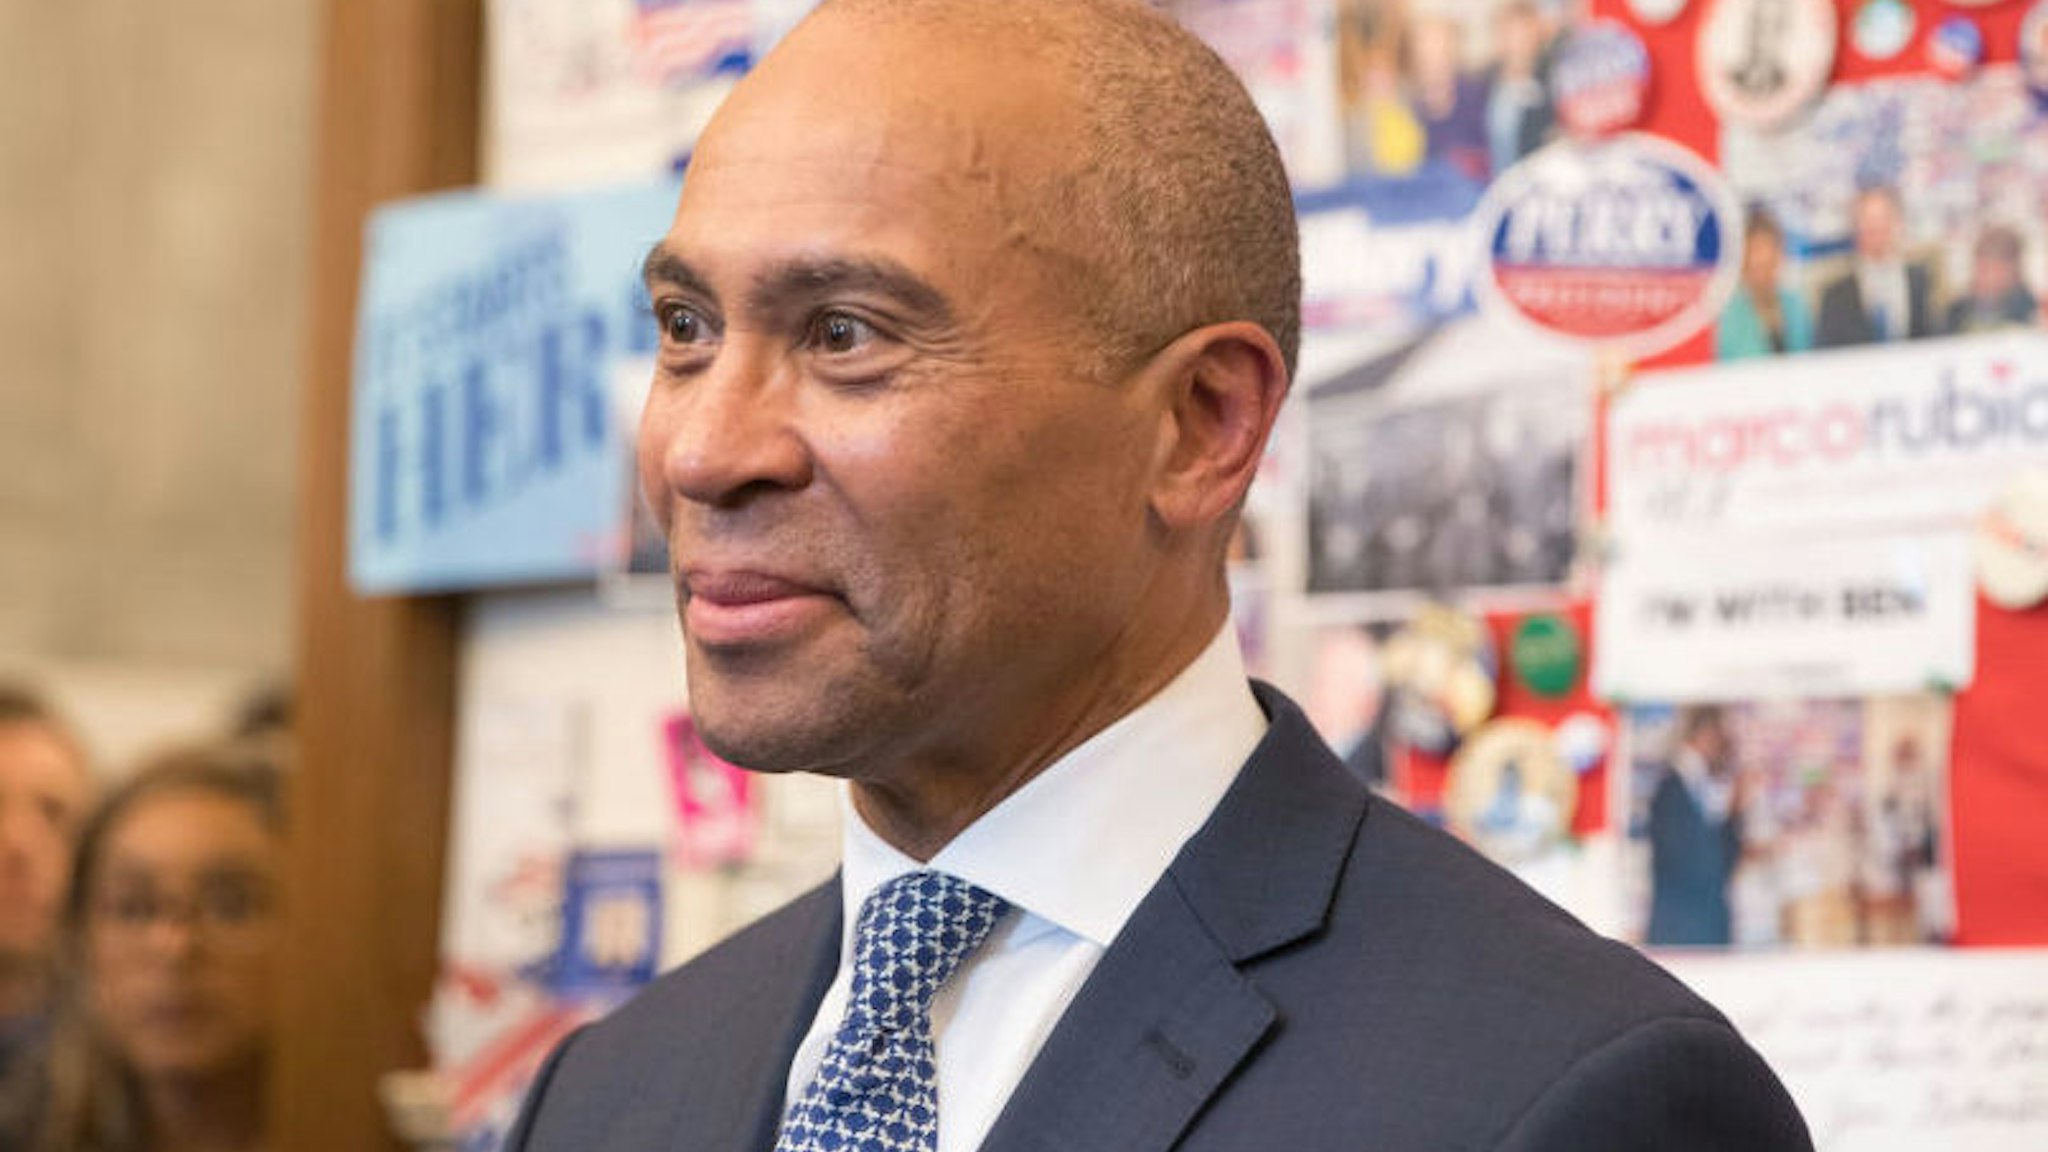 CONCORD, NH - NOVEMBER 14: Former Massachusetts Governor Deval Patrick stands in the visitor center of the New Hampshire State House after he filed his paperwork to run for president in 2020 at the New Hampshire State House on November 14, 2019 in Concord, New Hampshire. Patrick announced his late entry to the presidential race with less than three months to go before the first nominating contest.